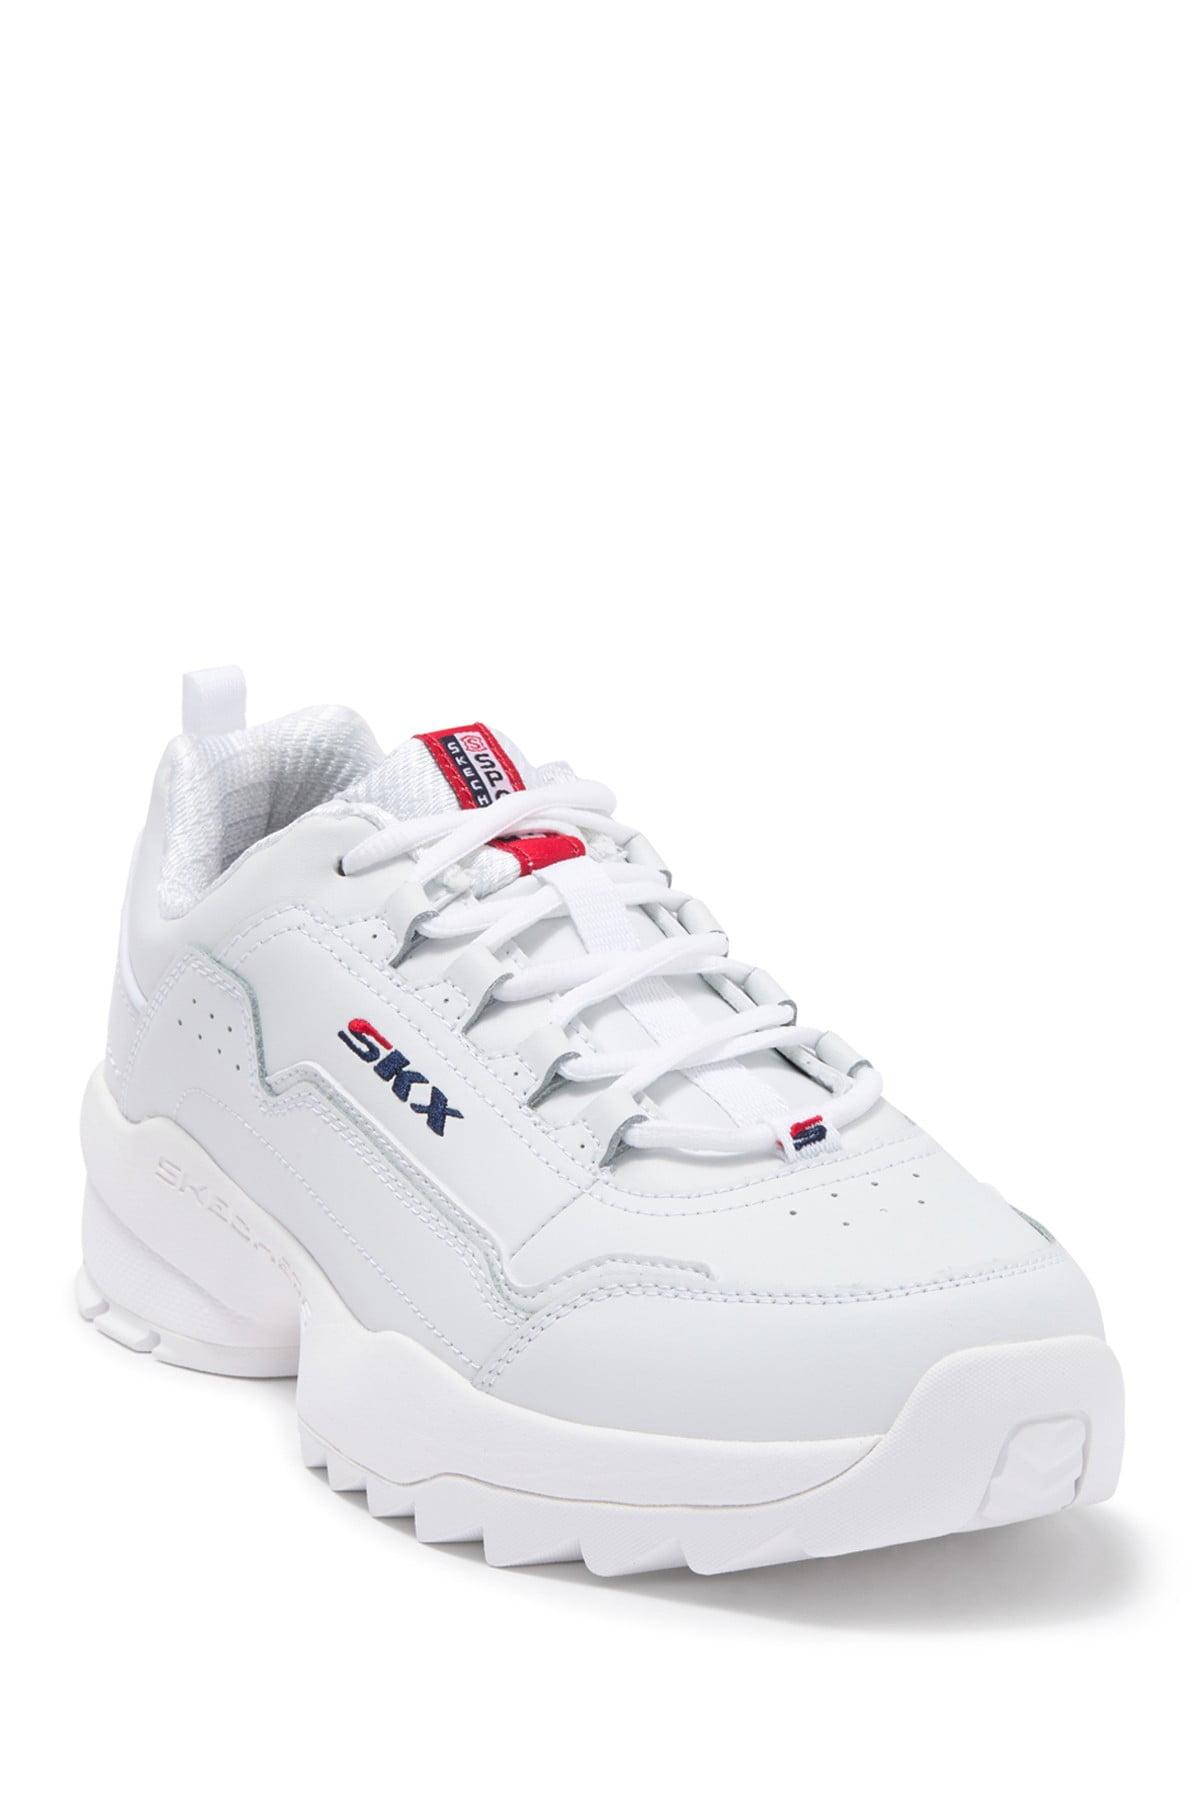 Discover more than 168 skechers white running shoes best - kenmei.edu.vn